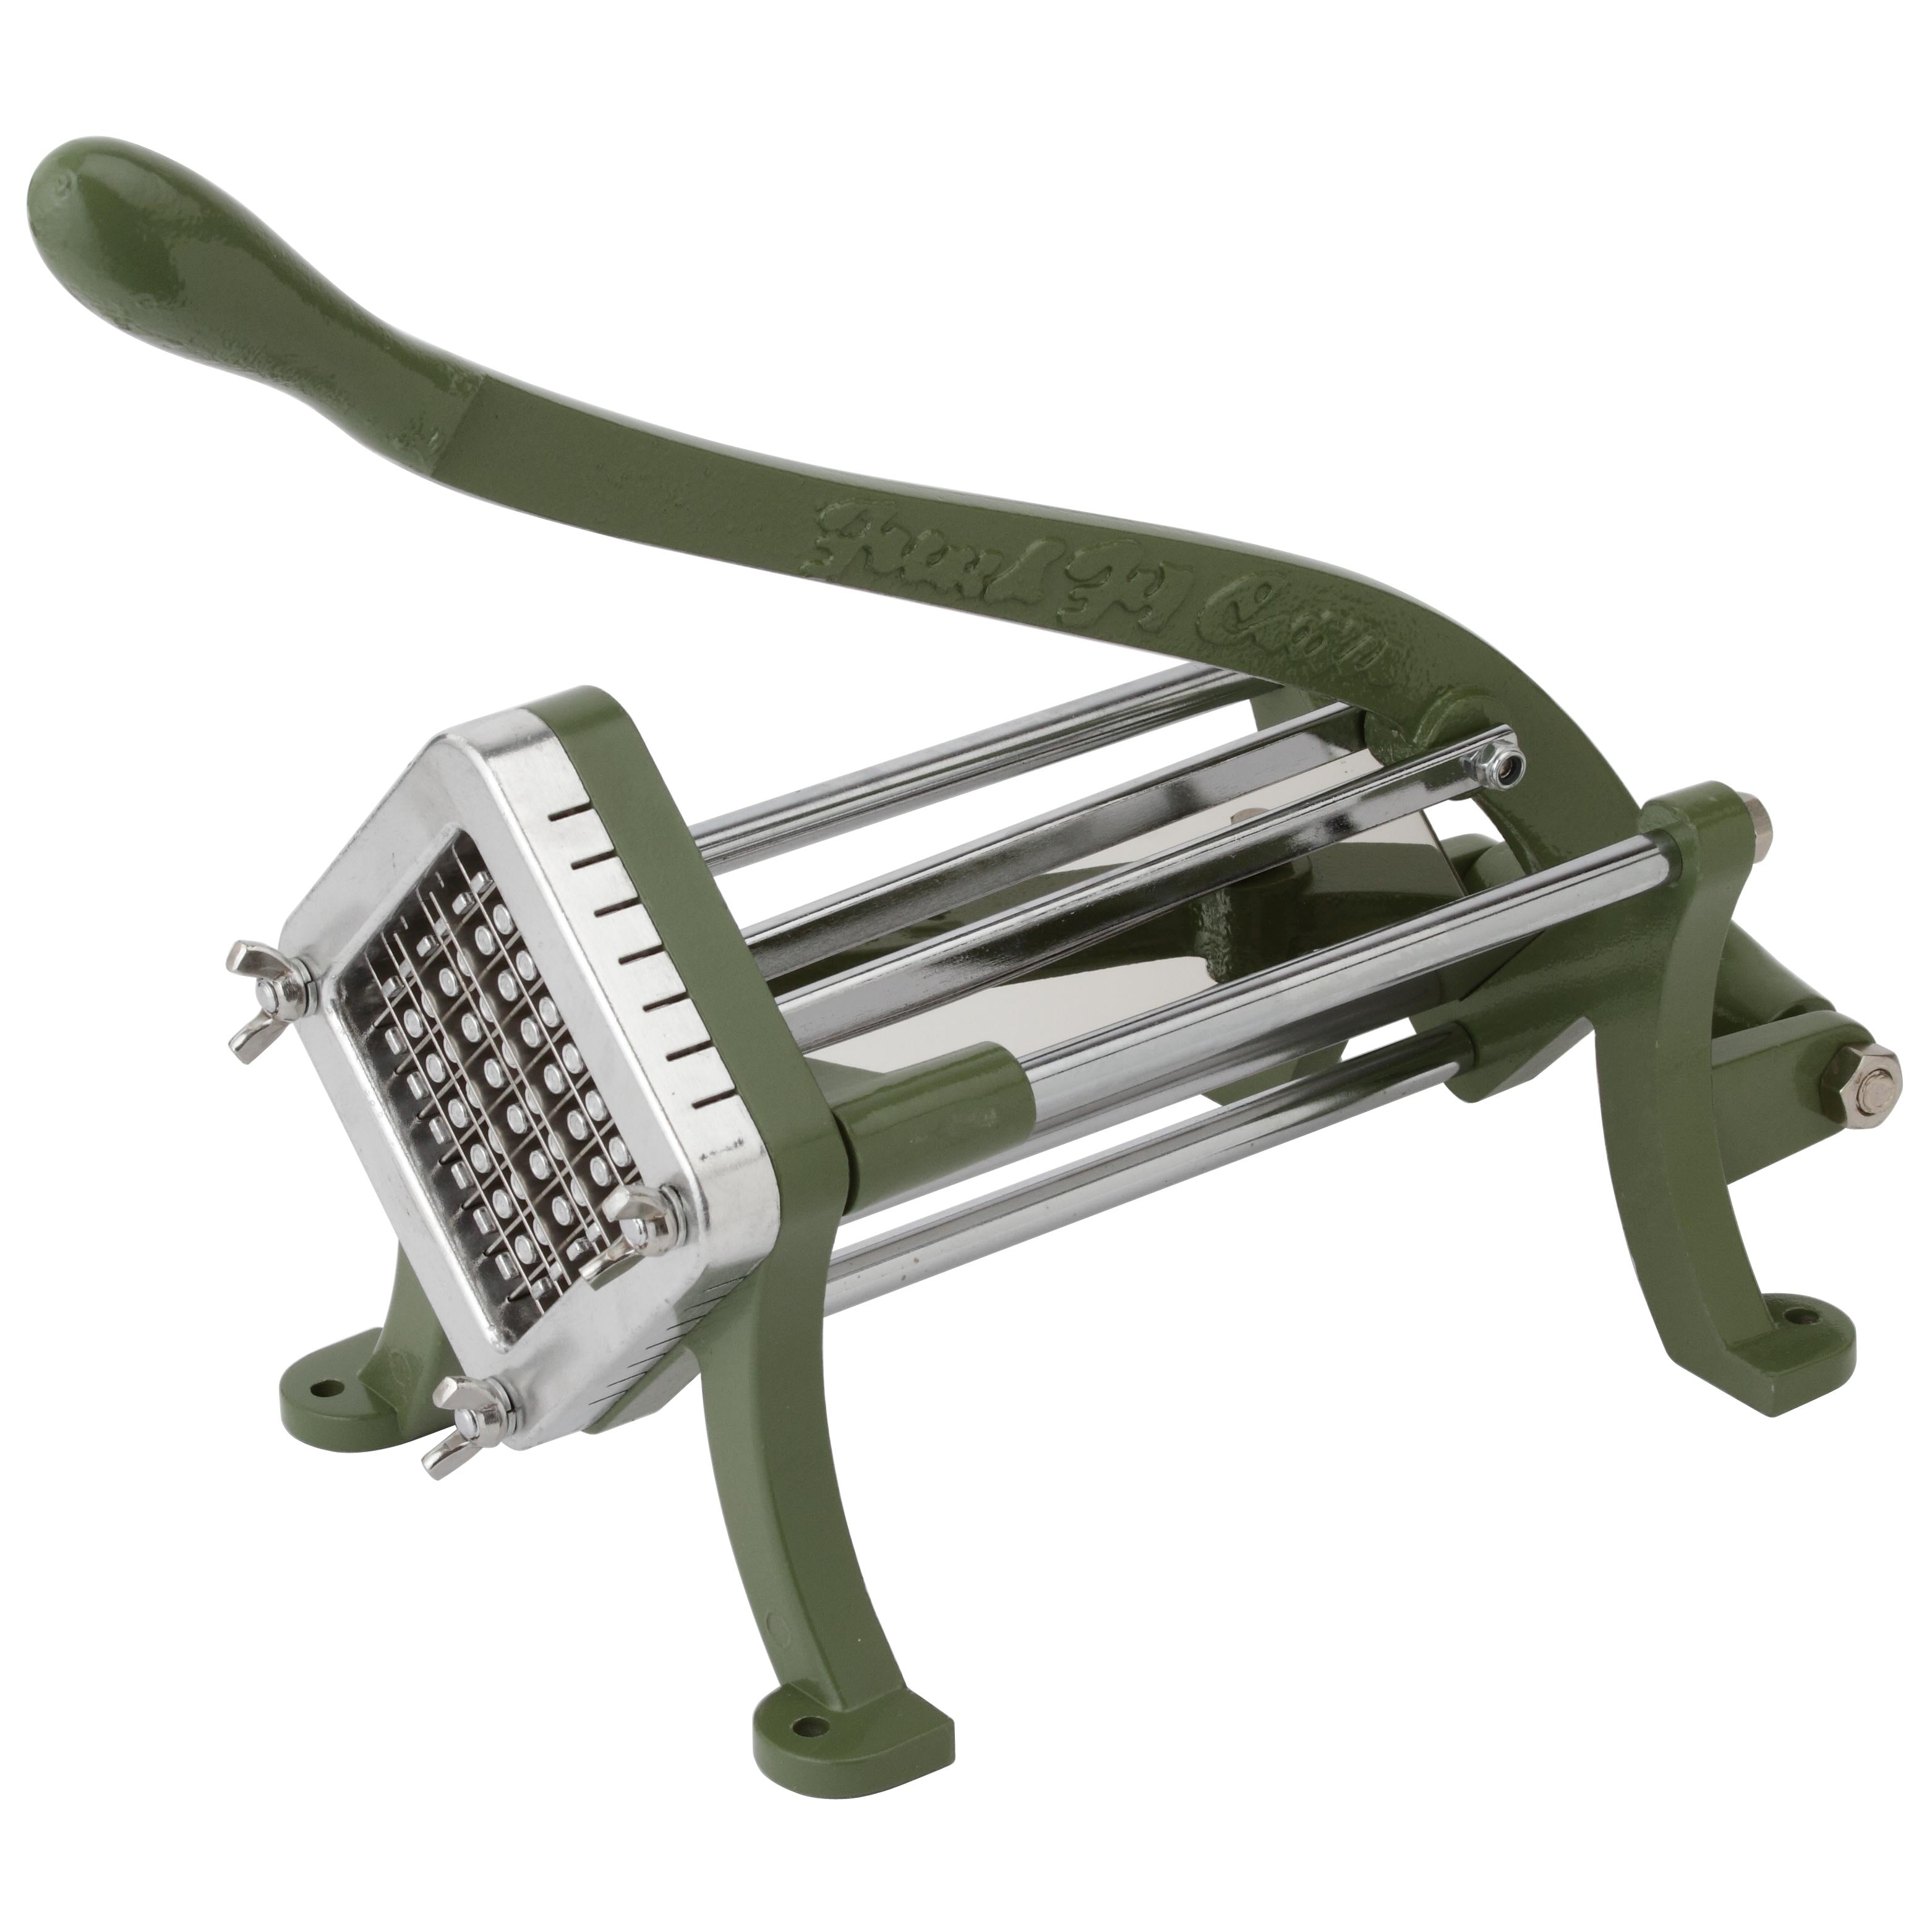 Royal Industries Potato Cutter Blade Assembly